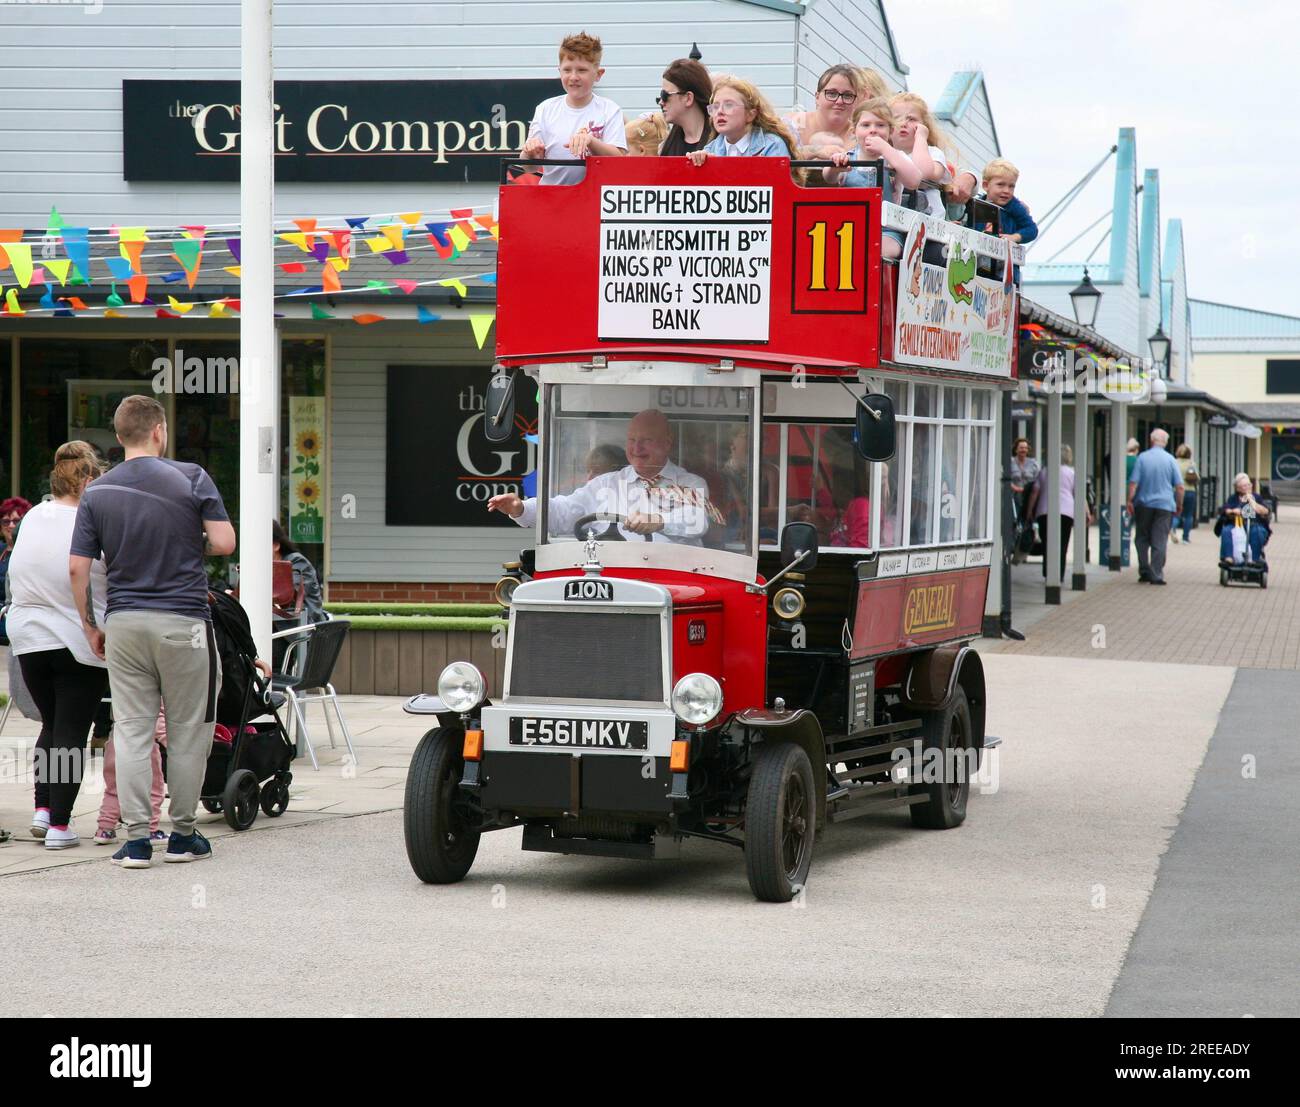 A vintage bus takes holidaymakers for a spin around the Affinity Shopping Mall at the Port of Fleetwood, Lancashire, United Kingdom Stock Photo